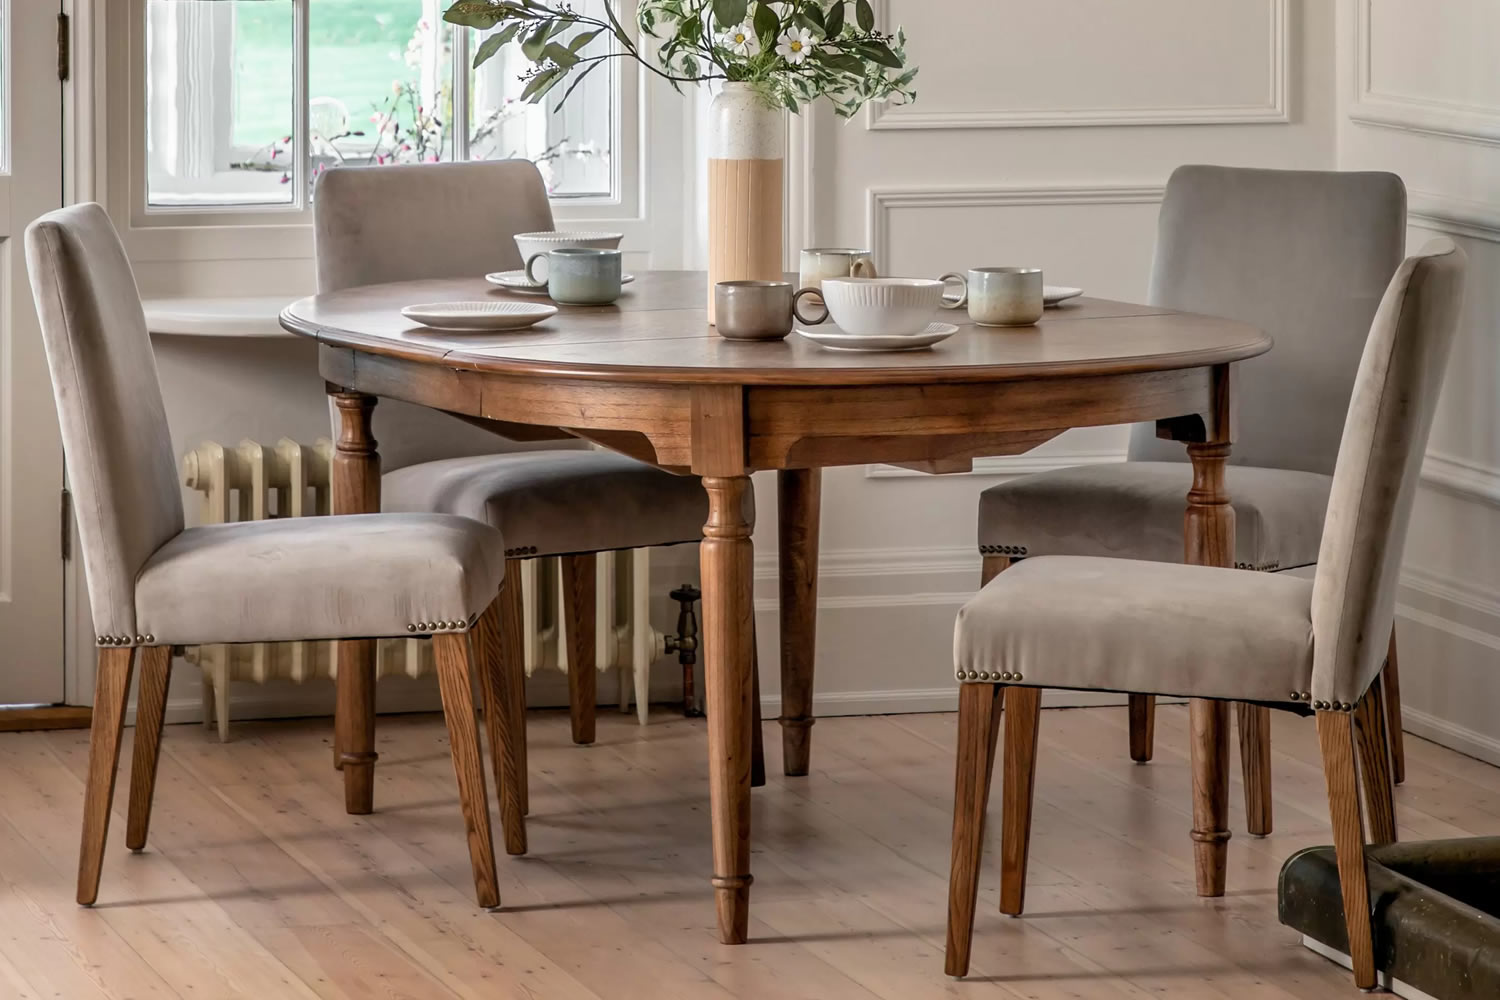 View Highgrove Small Round Extending Dining Table Crafted From Mindi Wood With Intricate Marquetry Detail SpindleTurned Legs Seats 46 People information